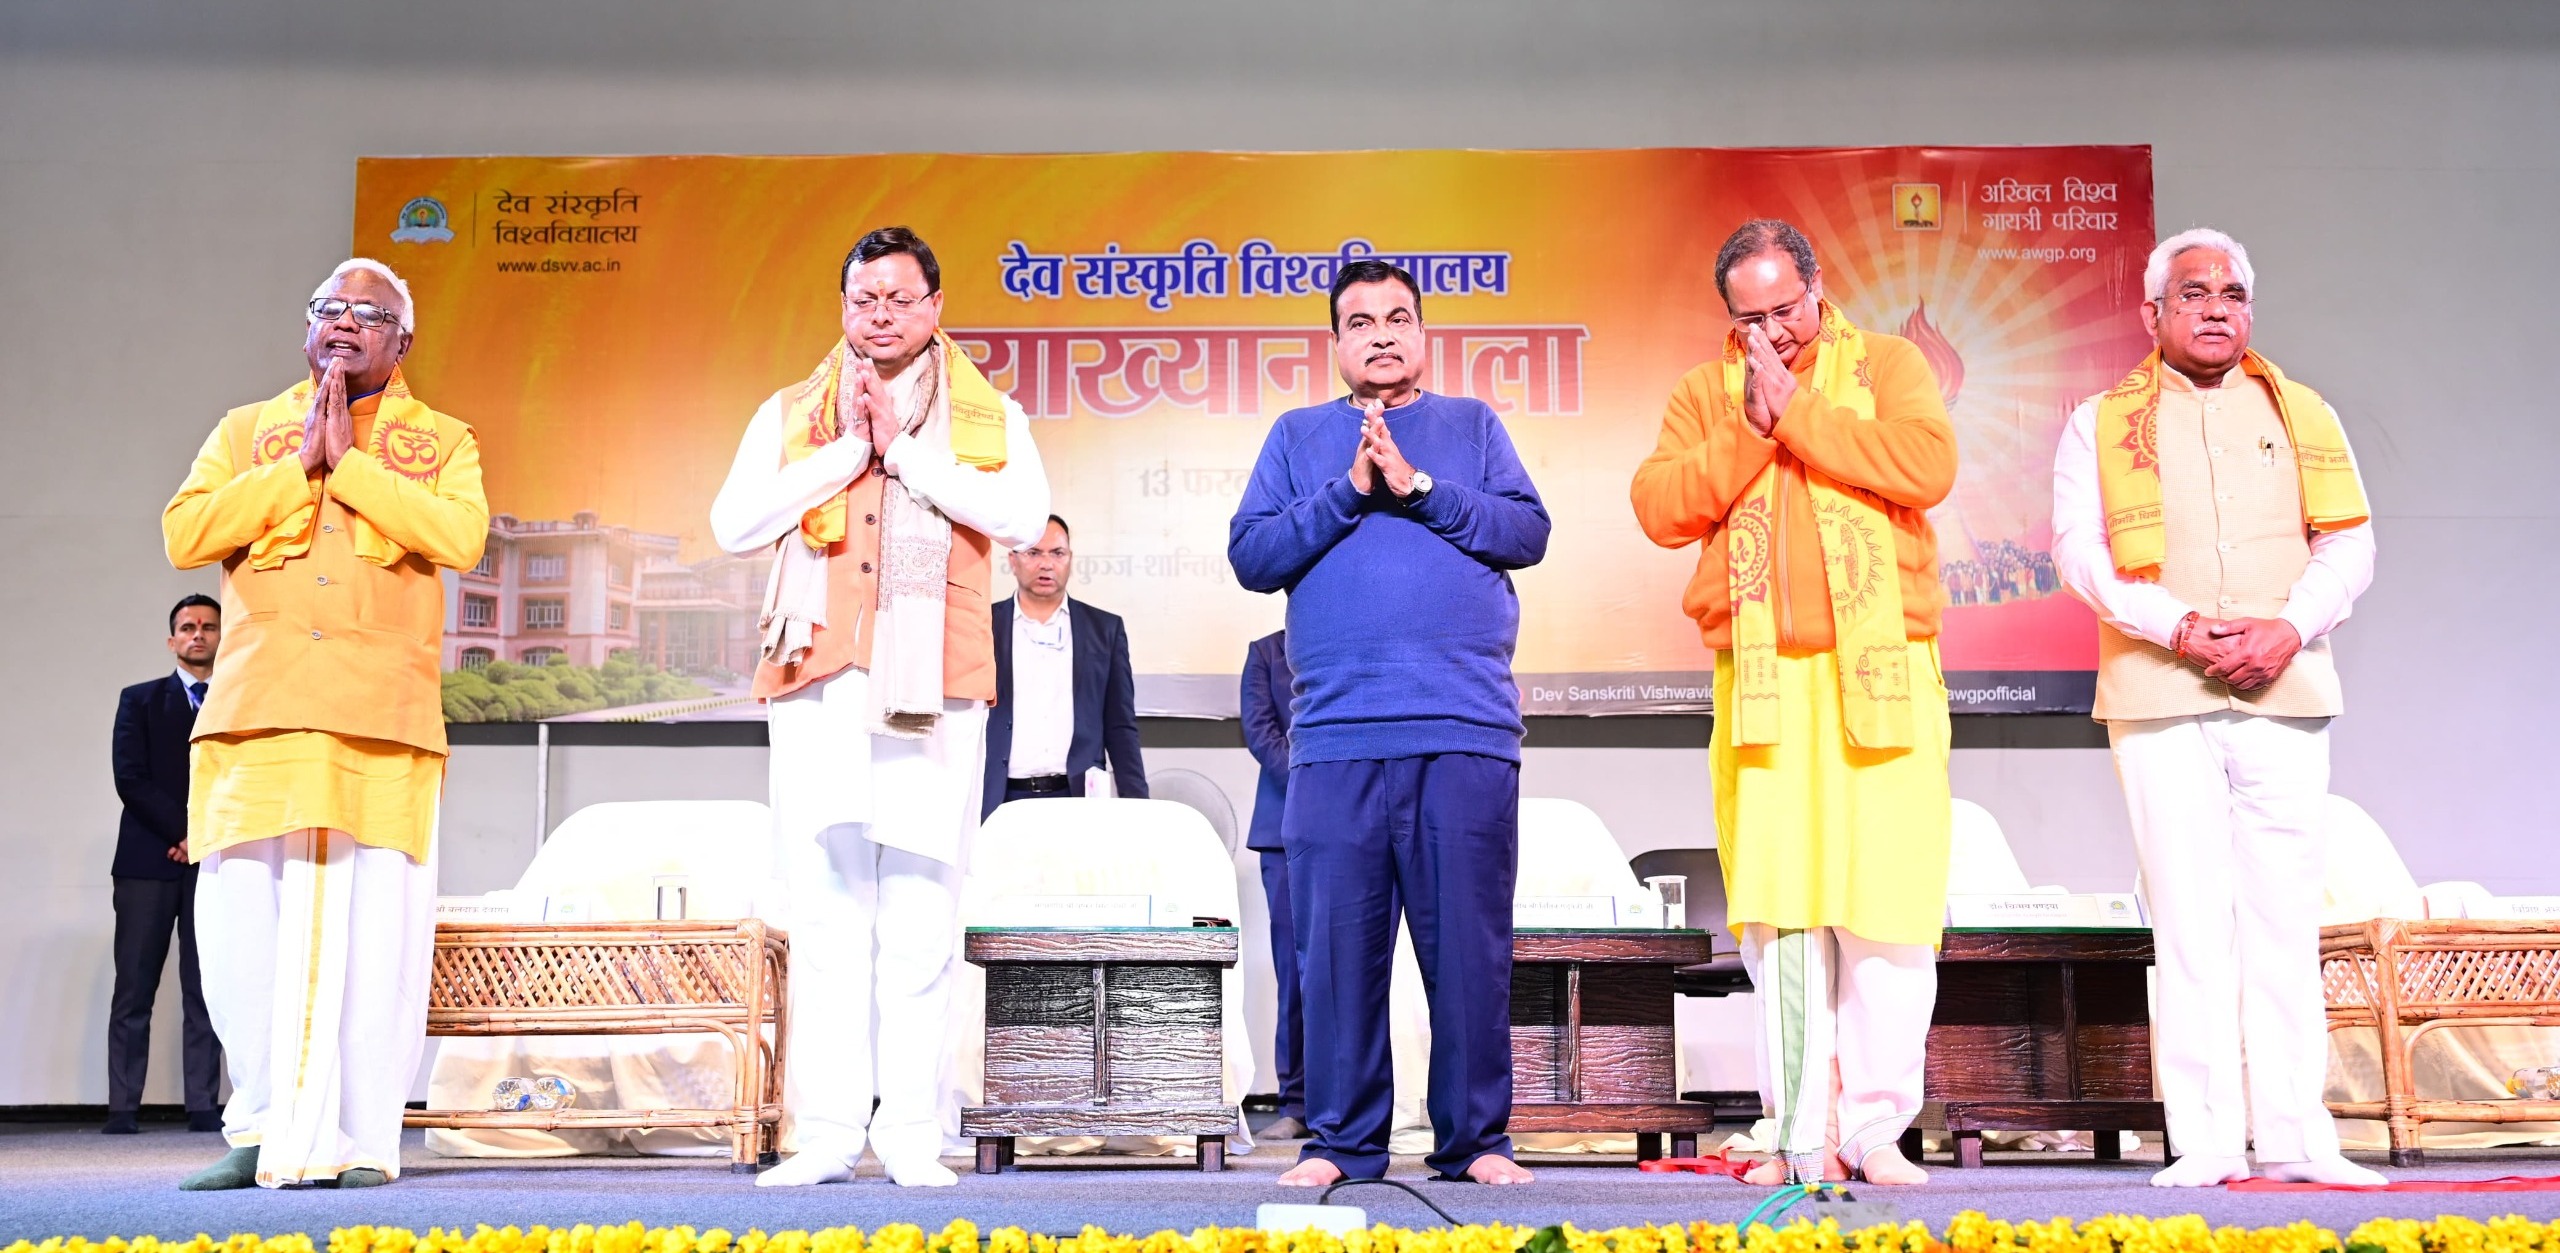 Union Minister Nitin Gadkari and CM Dhami participated in the lecture series program of Dev Sanskriti University.